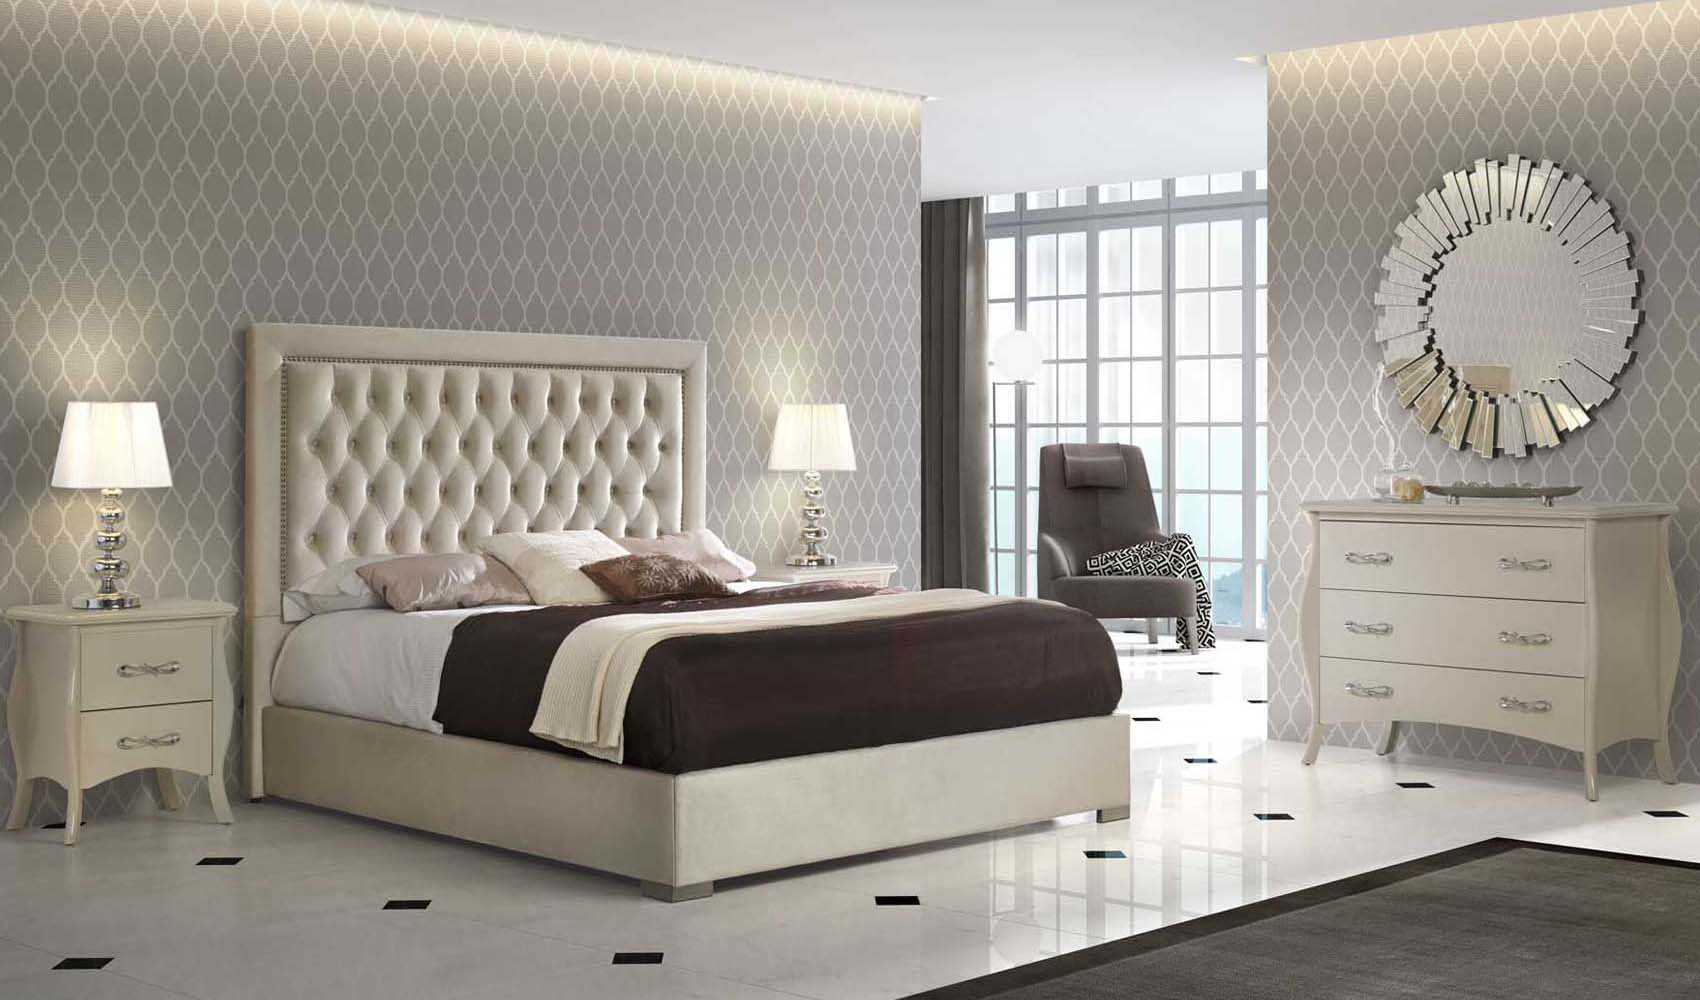 High End Modern Design Cream Bedroom Set pertaining to sizing 1700 X 1000